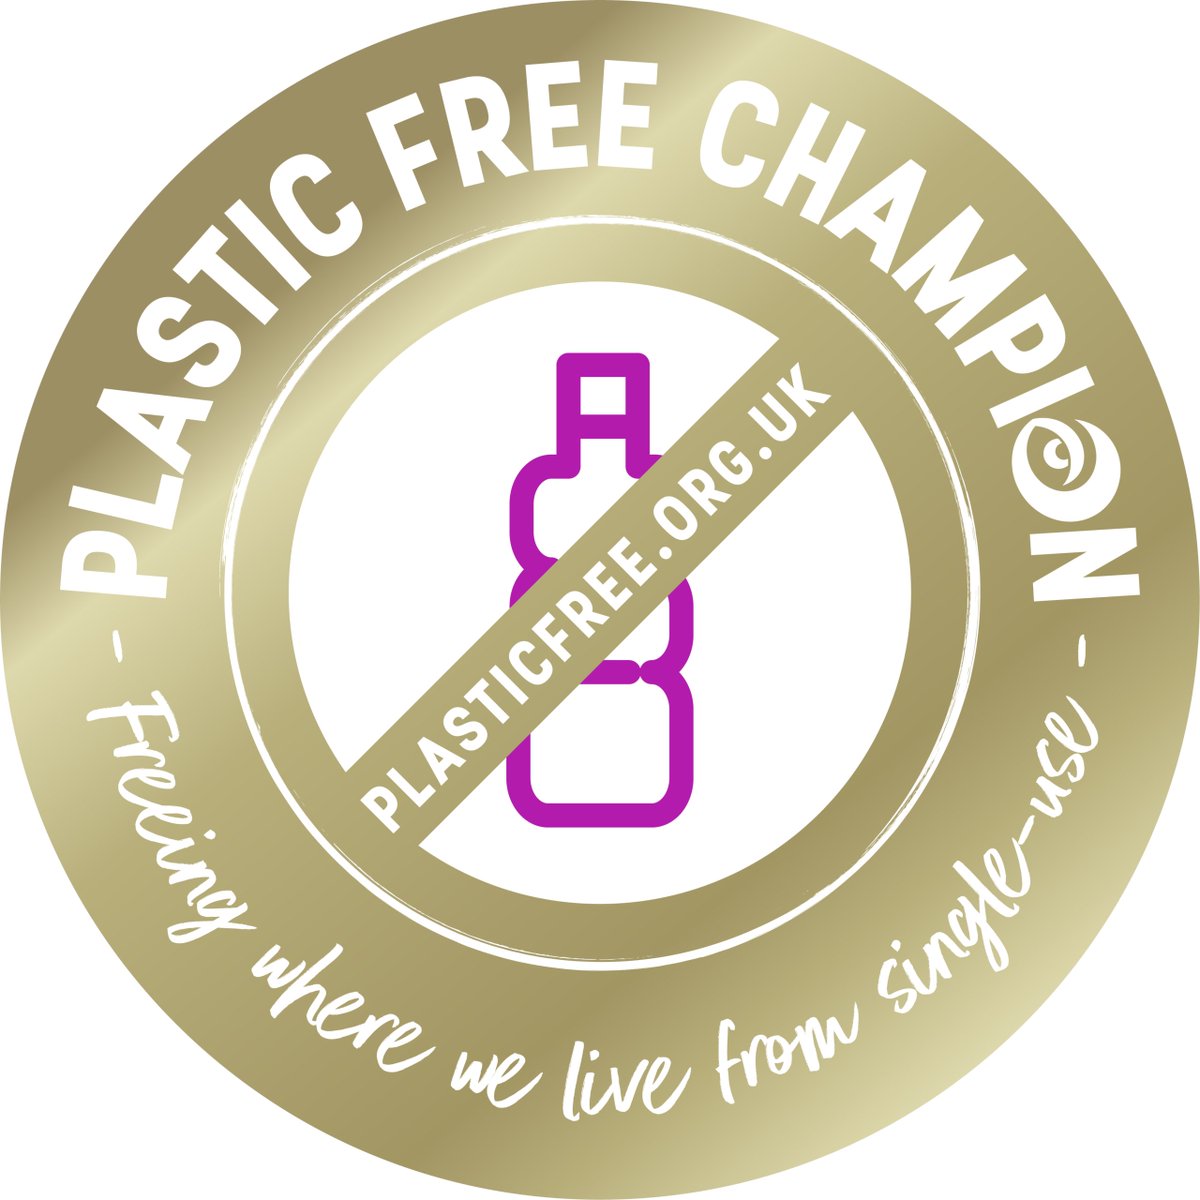 Are you a #local business to #Farnham #Surrey and want to become more #ecofriendly and #sustainable? If so, join us and become a #plasticfree champion! To find out more about what we do and what it involves, contact us for information on plasticfreefarnham@gmail.com
#zeroplastic